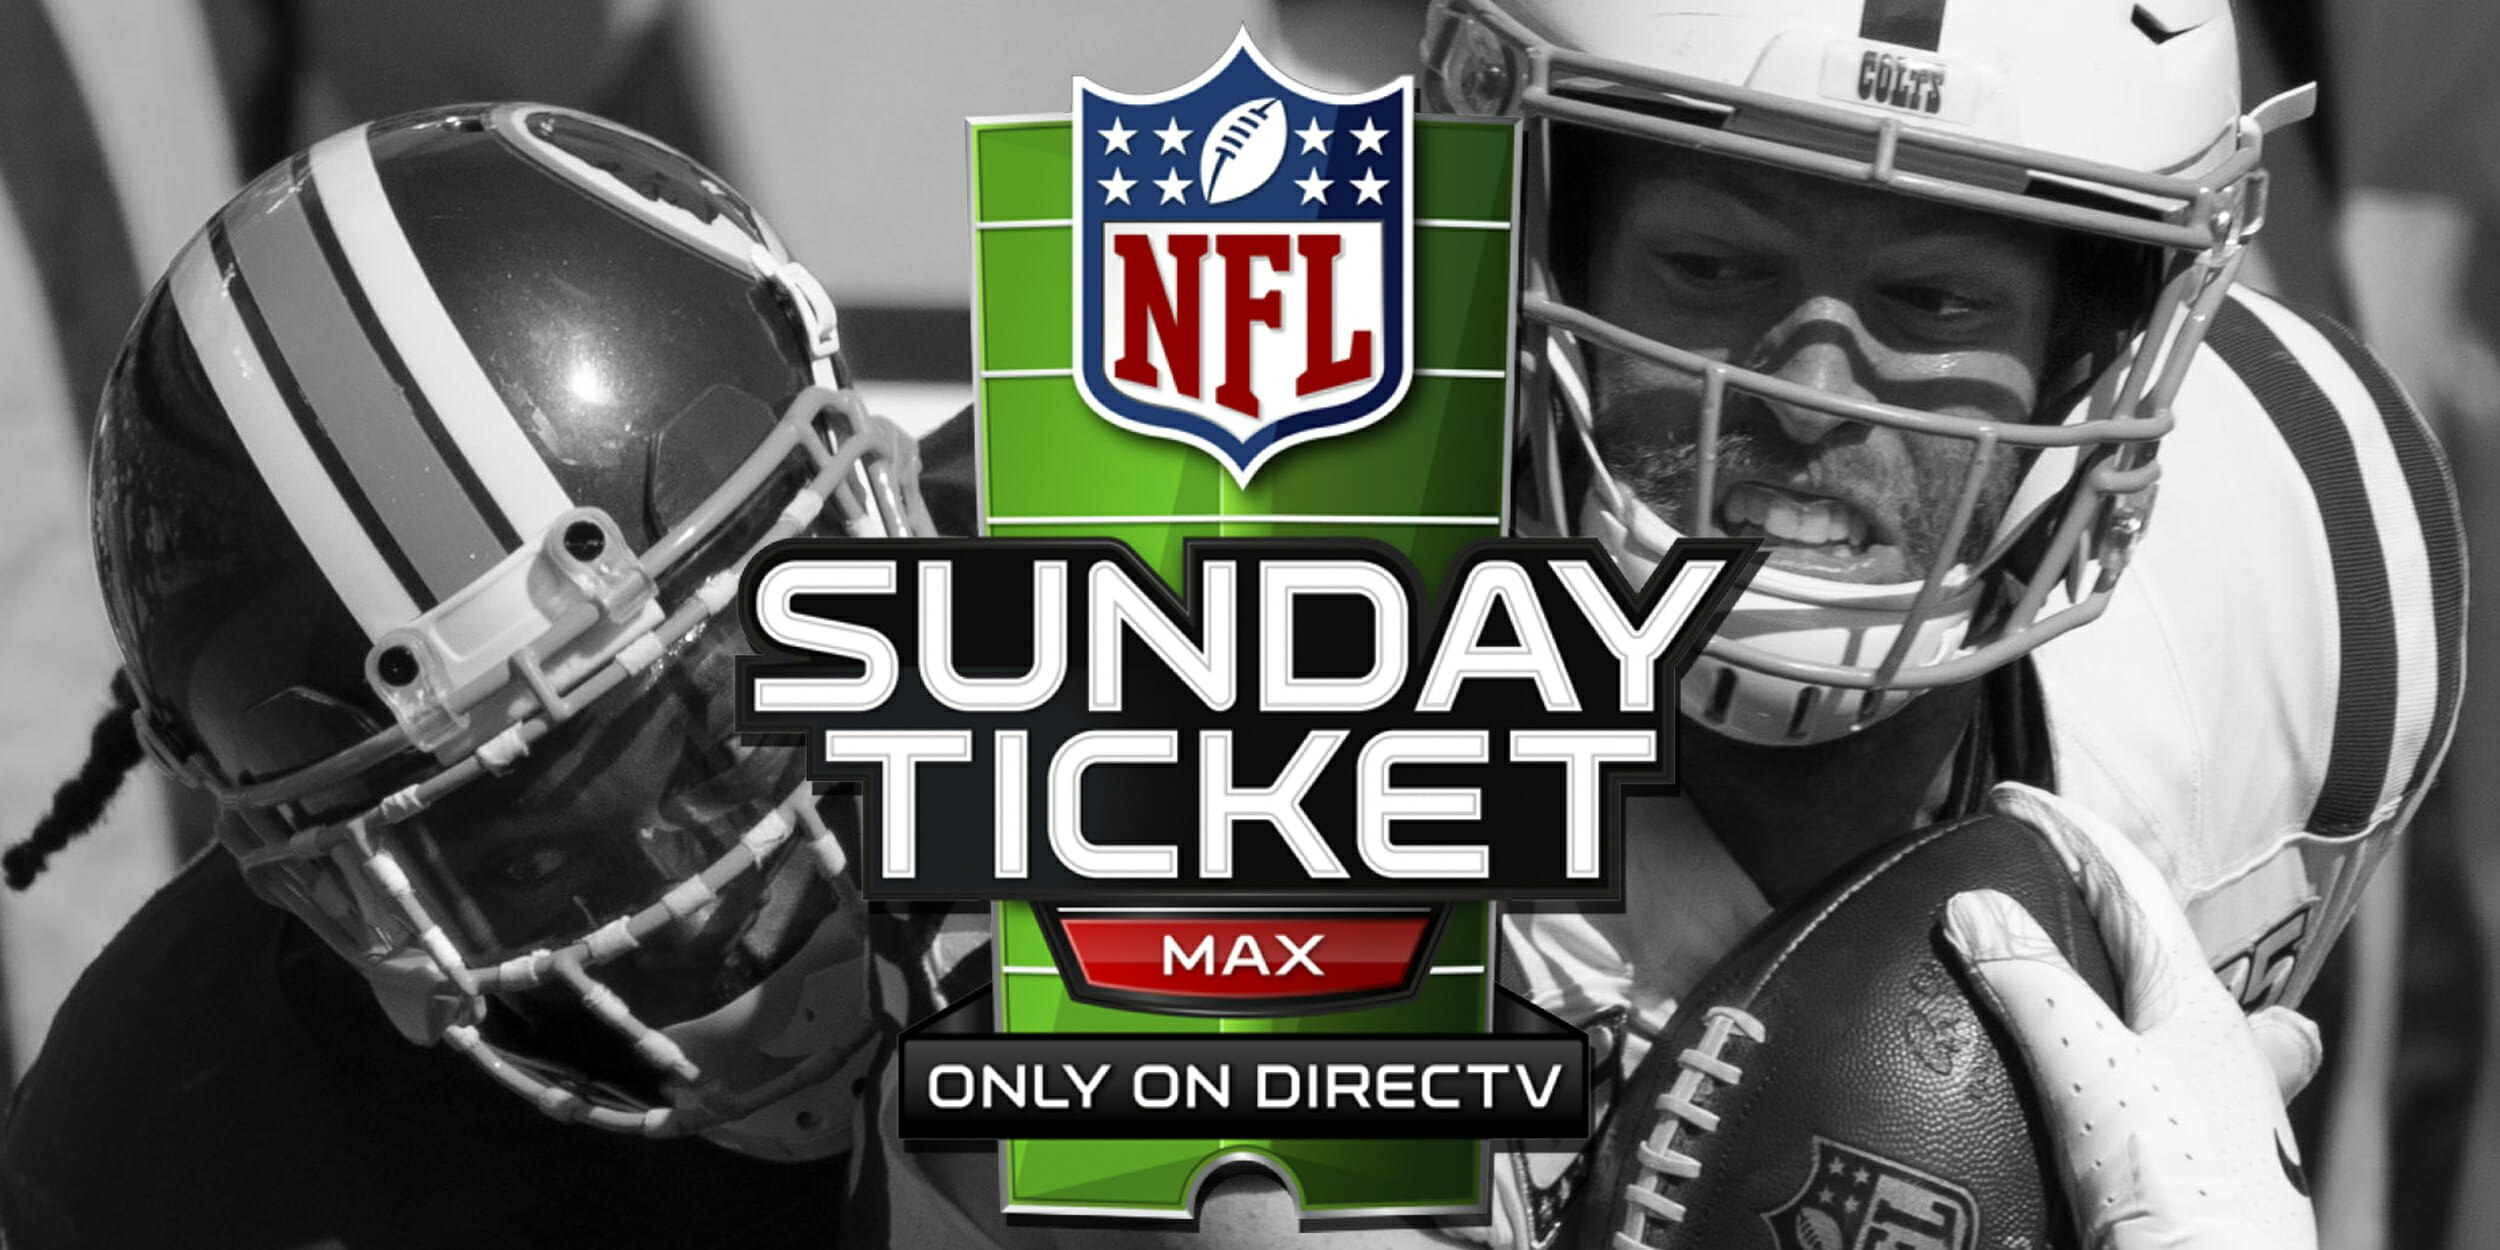 How to Watch NFL Sunday Ticket on Amazon Prime